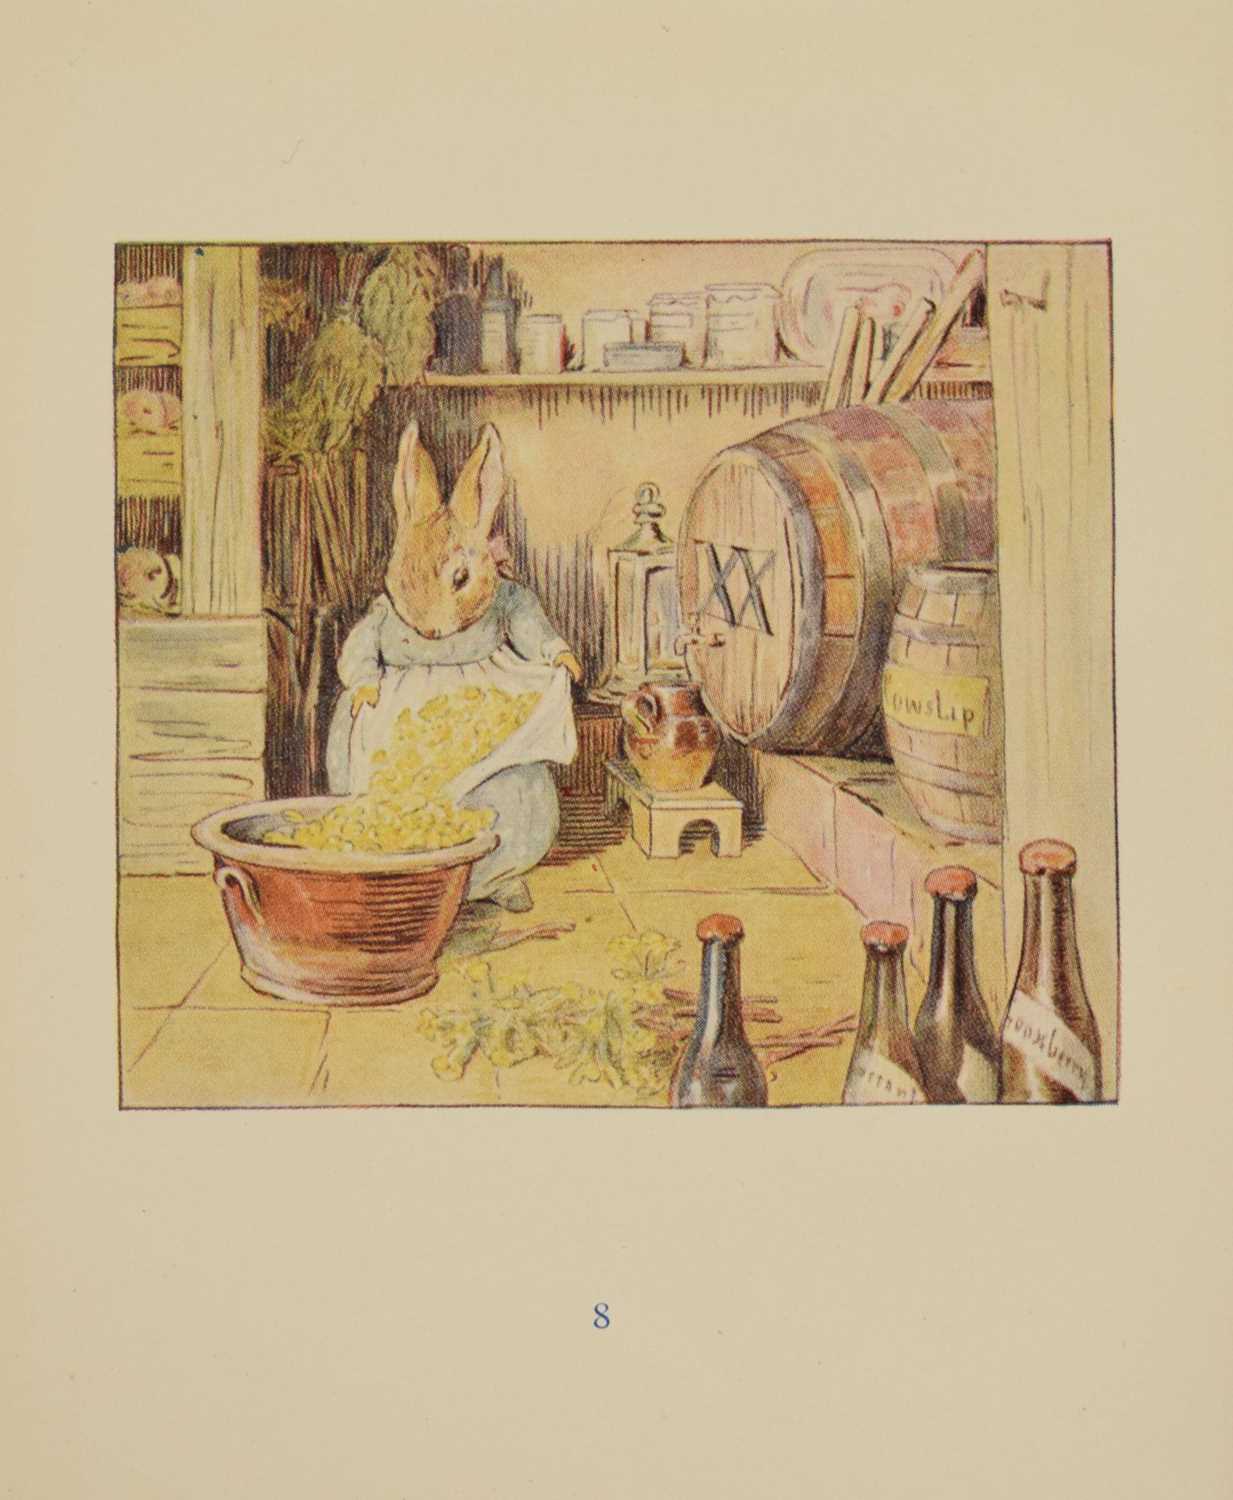 Potter, Beatrix - 'Cecily Parsley's Nursery Rhymes' - First edition - Image 11 of 23